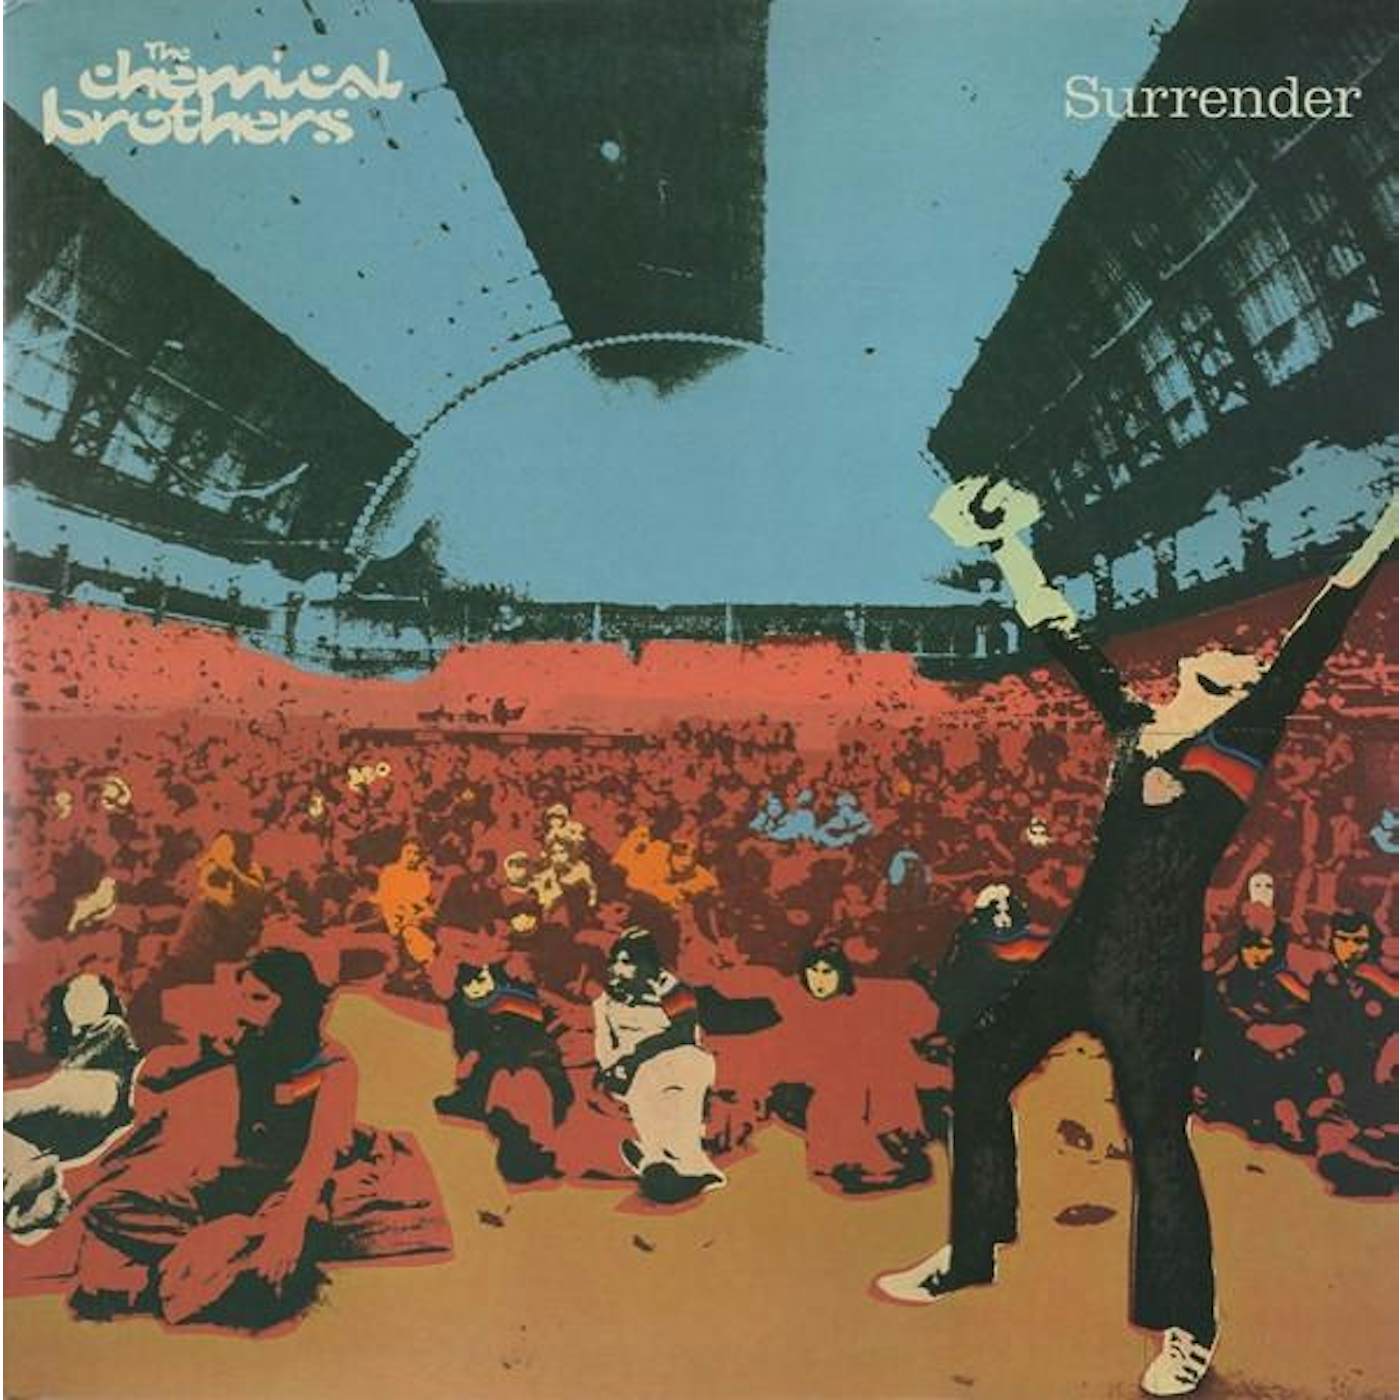 The Chemical Brothers SURRENDER Vinyl Record